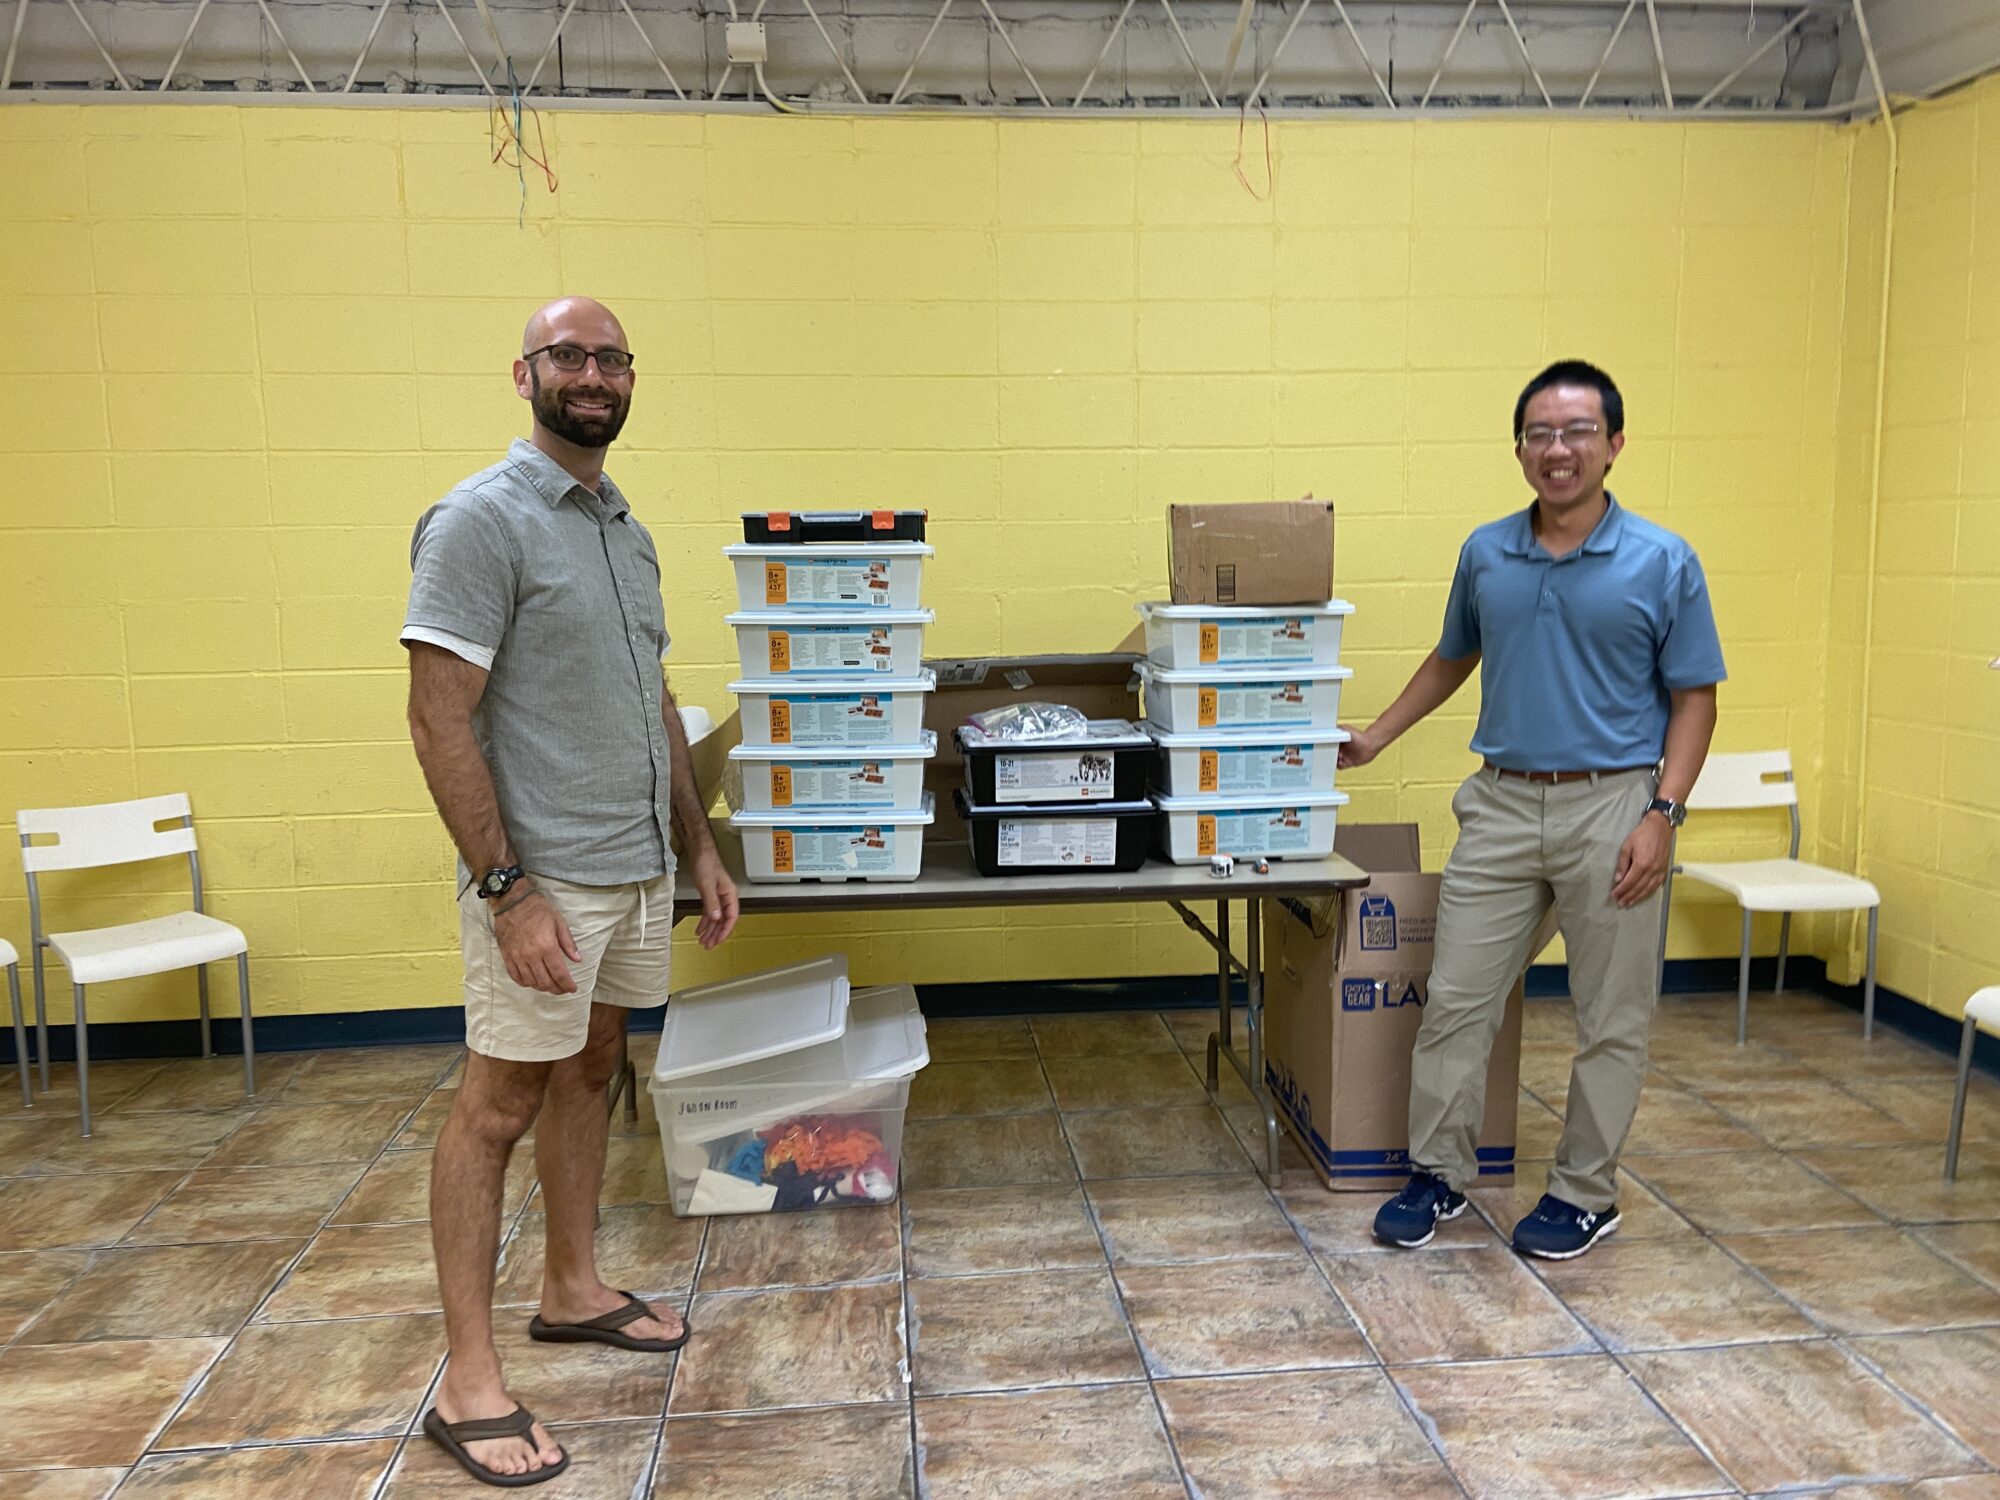 Part of RoboRecovery’s inventory at the STEM Library Lab. Todd Wackerman, Director of the STEM Library Lab, pictured left.